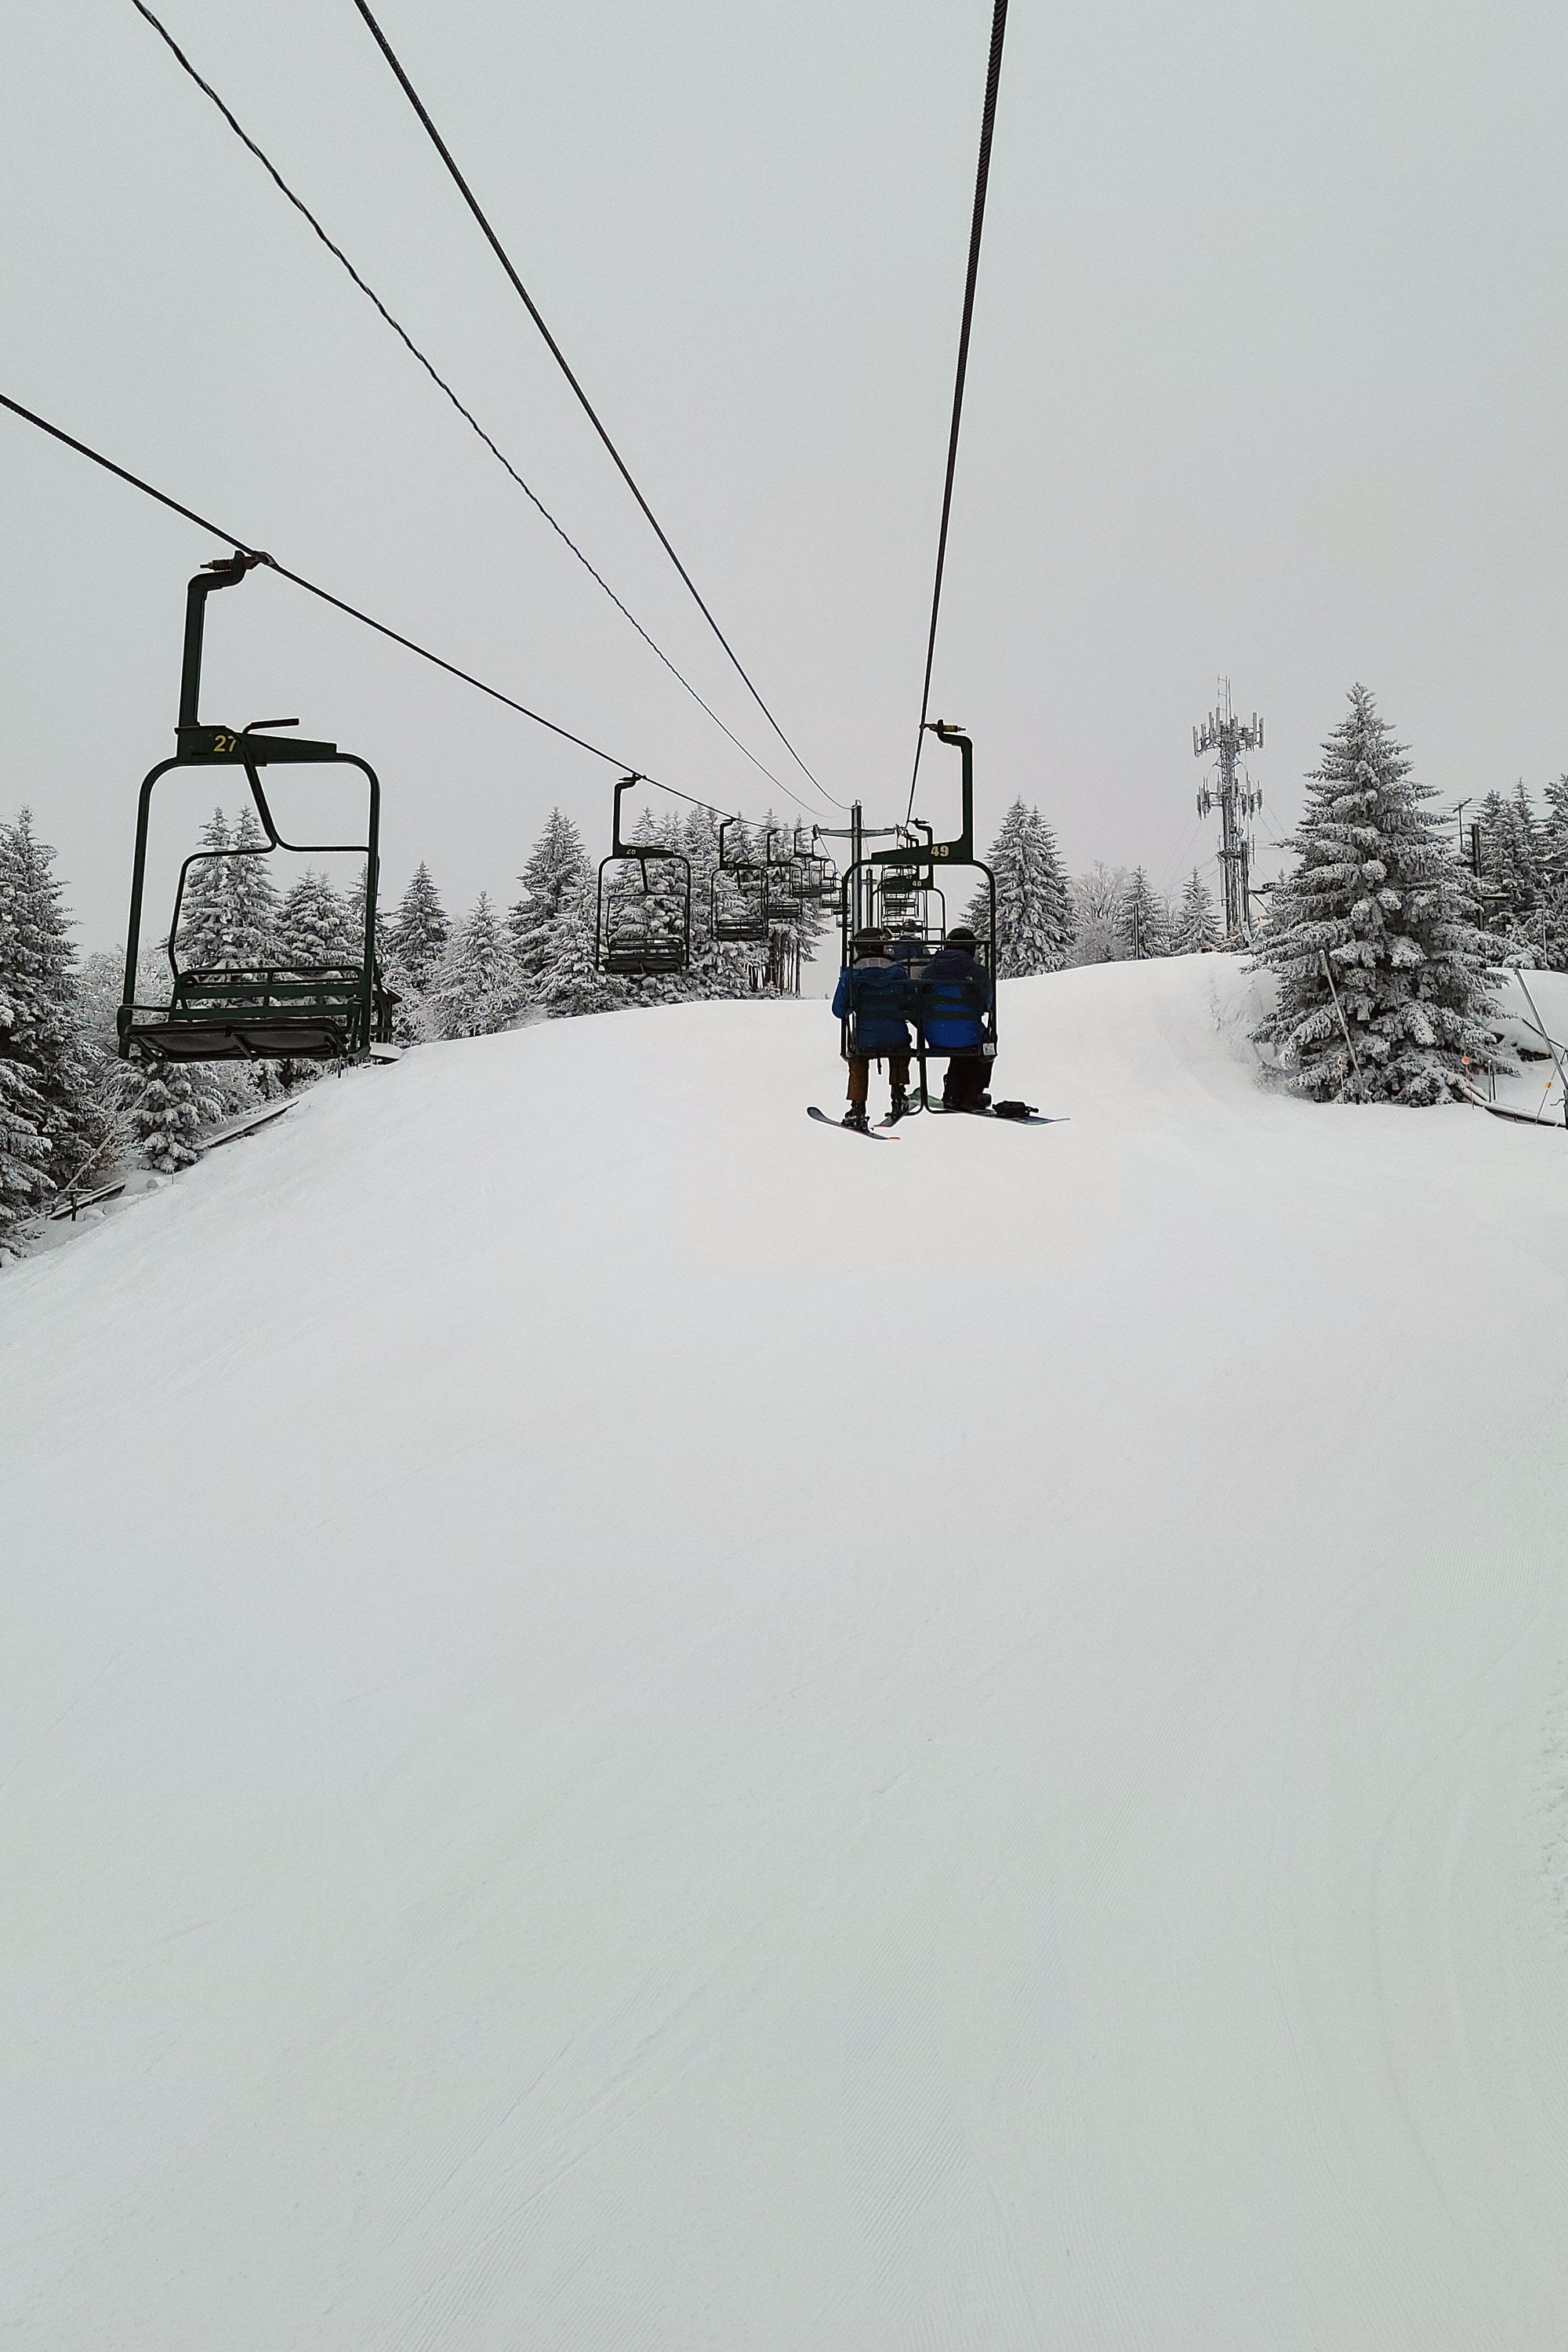 Skiers take the chairlift up McCauley Mountain.